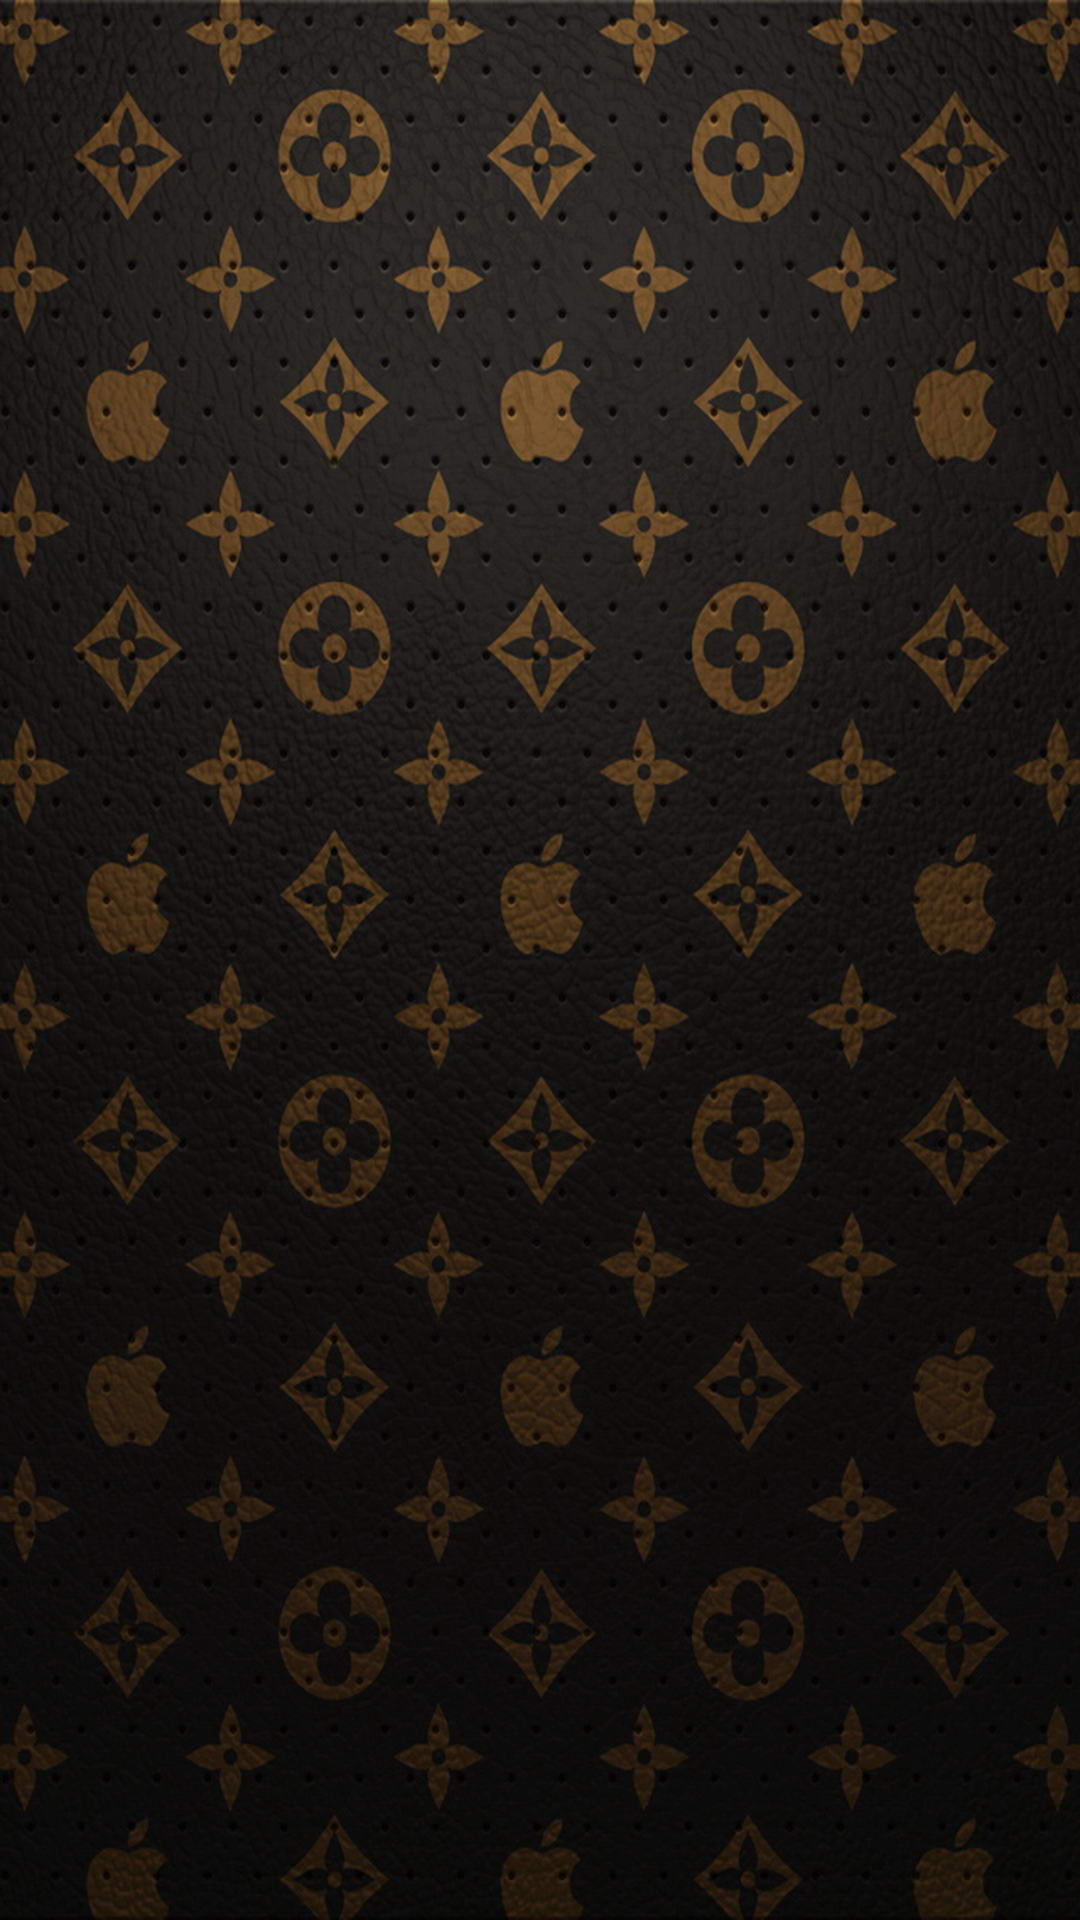 Gucci Wallpapers - Top 35 Best Gucci